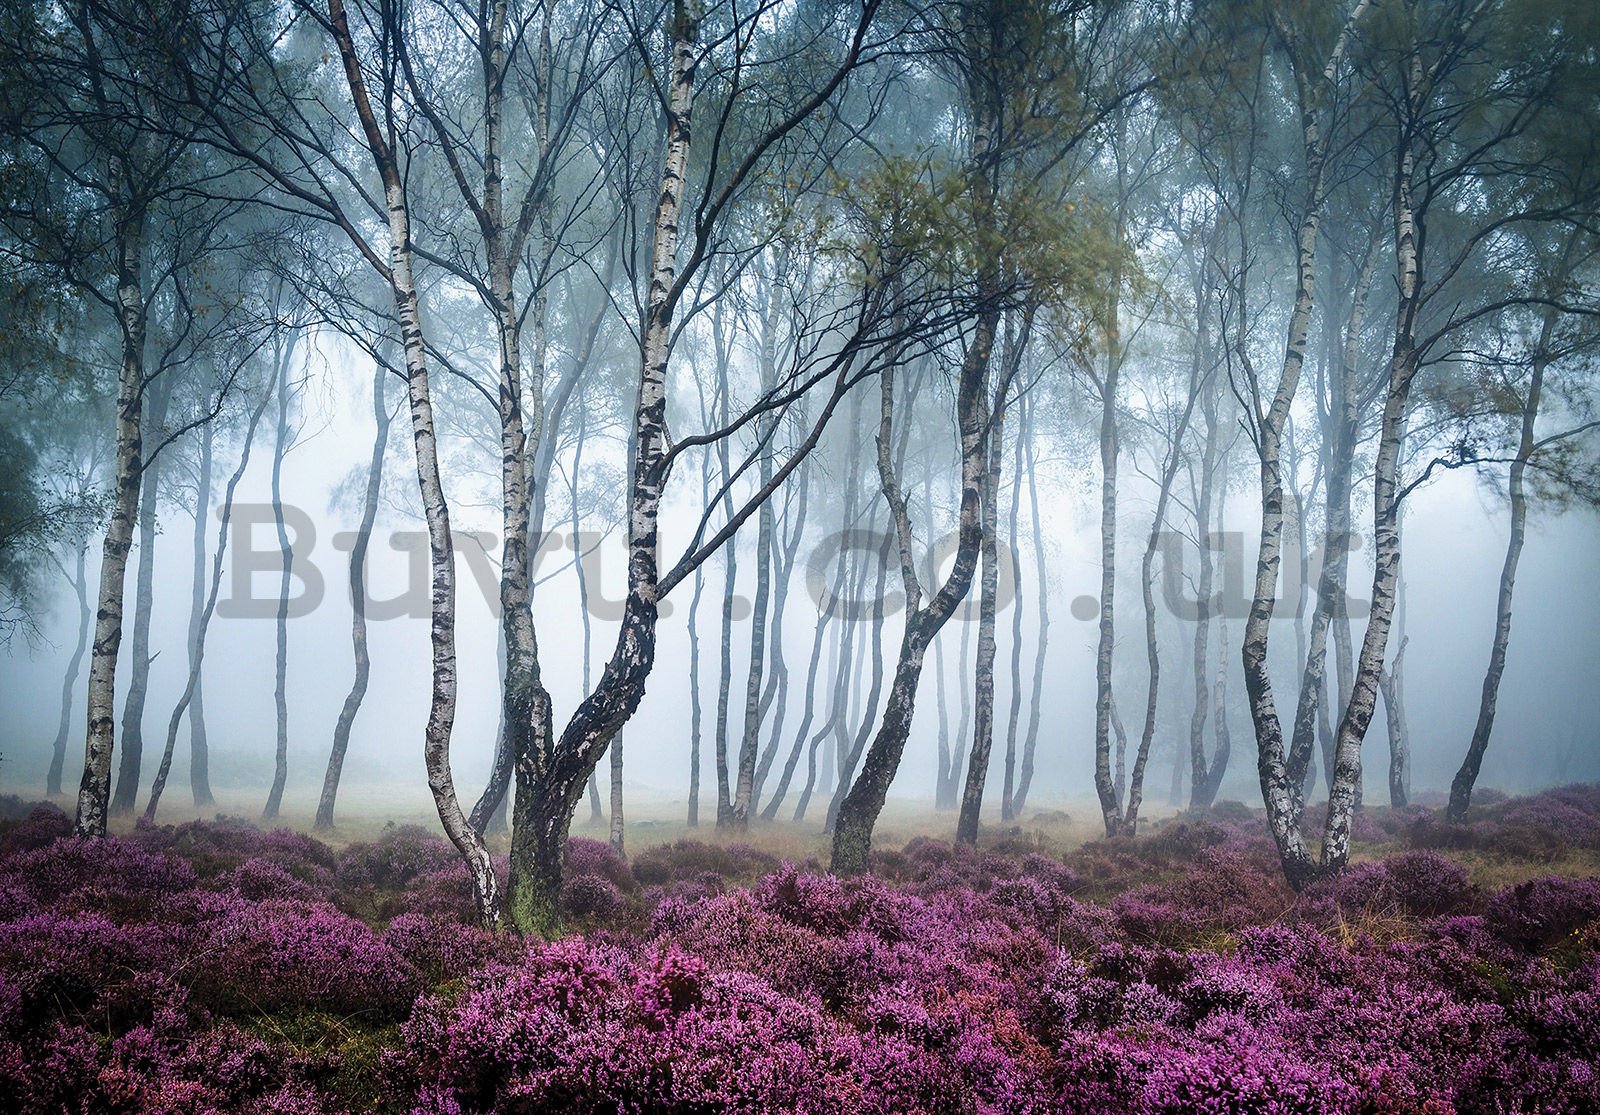 Wall mural vlies: The Mysterious Forest - 368x254 cm